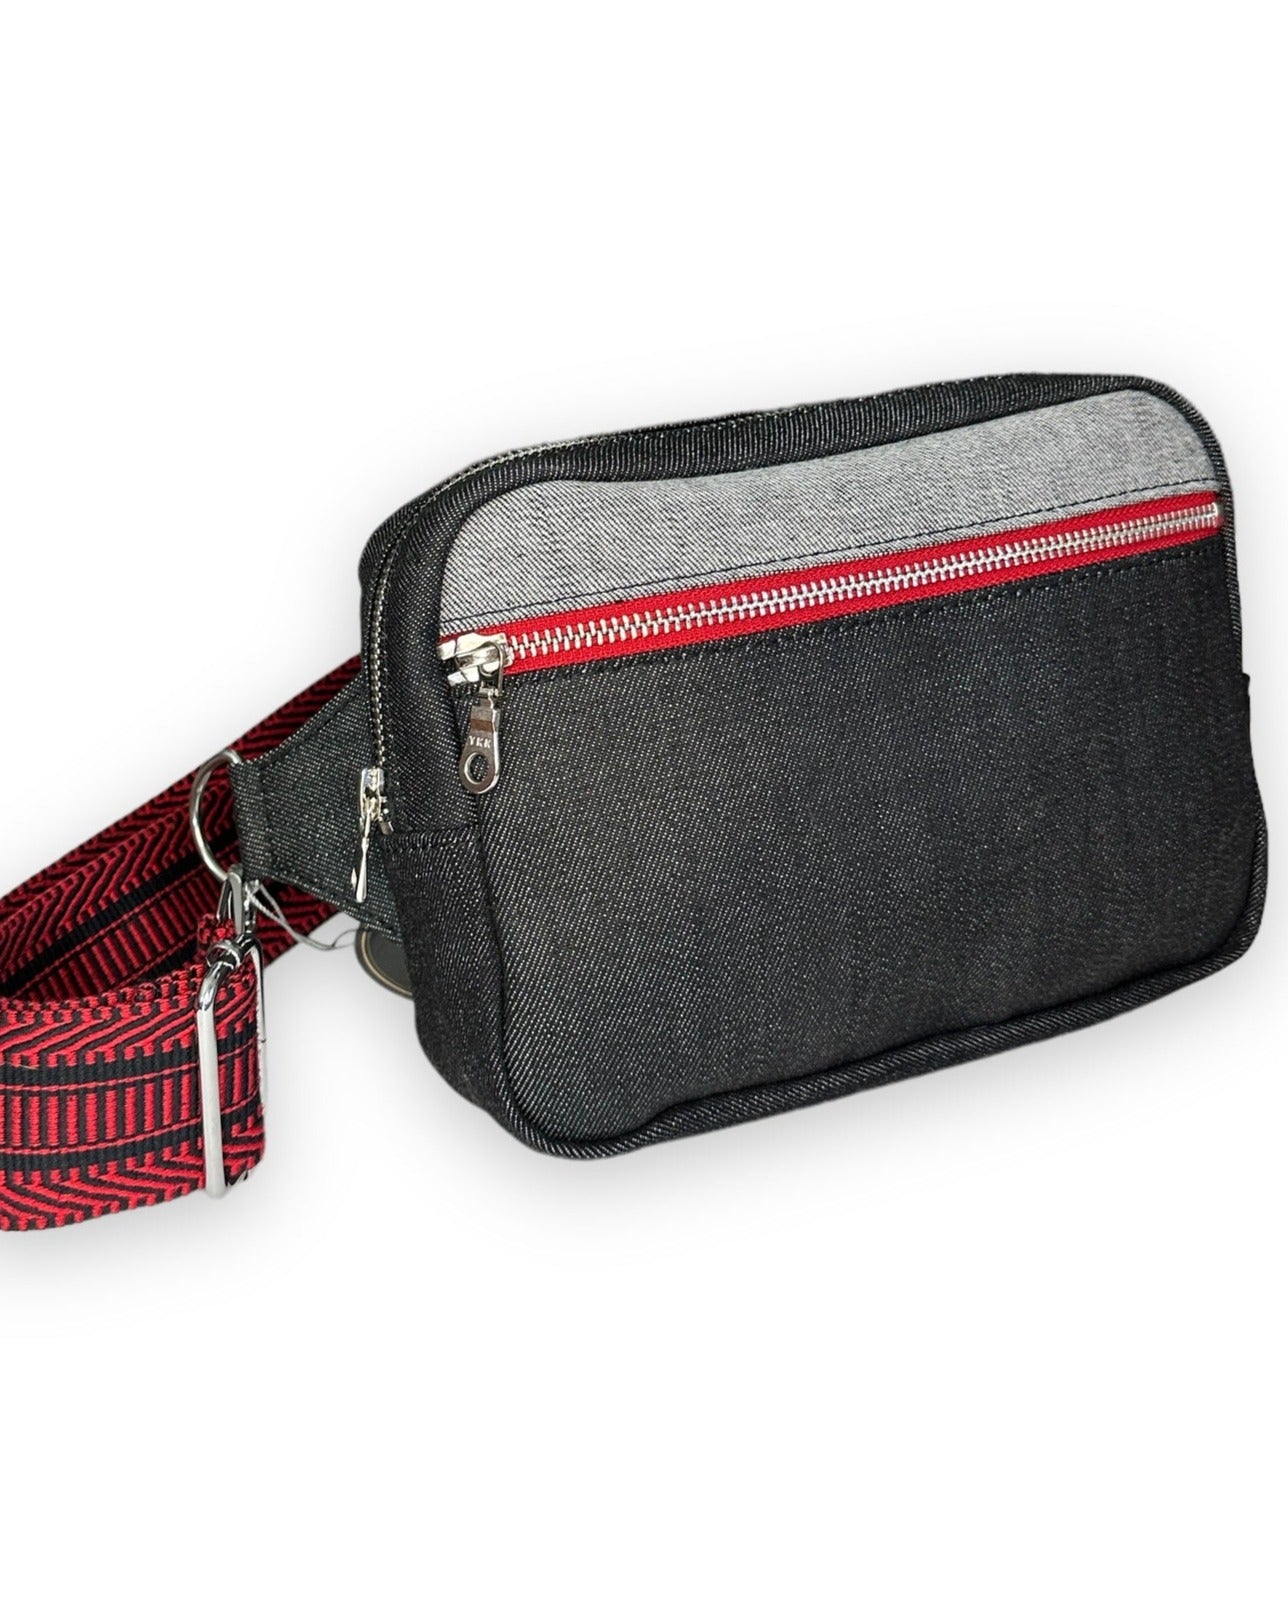 Black Crossbody Bag with Black/Red Guitar Strap – Gather Goods and Gifts